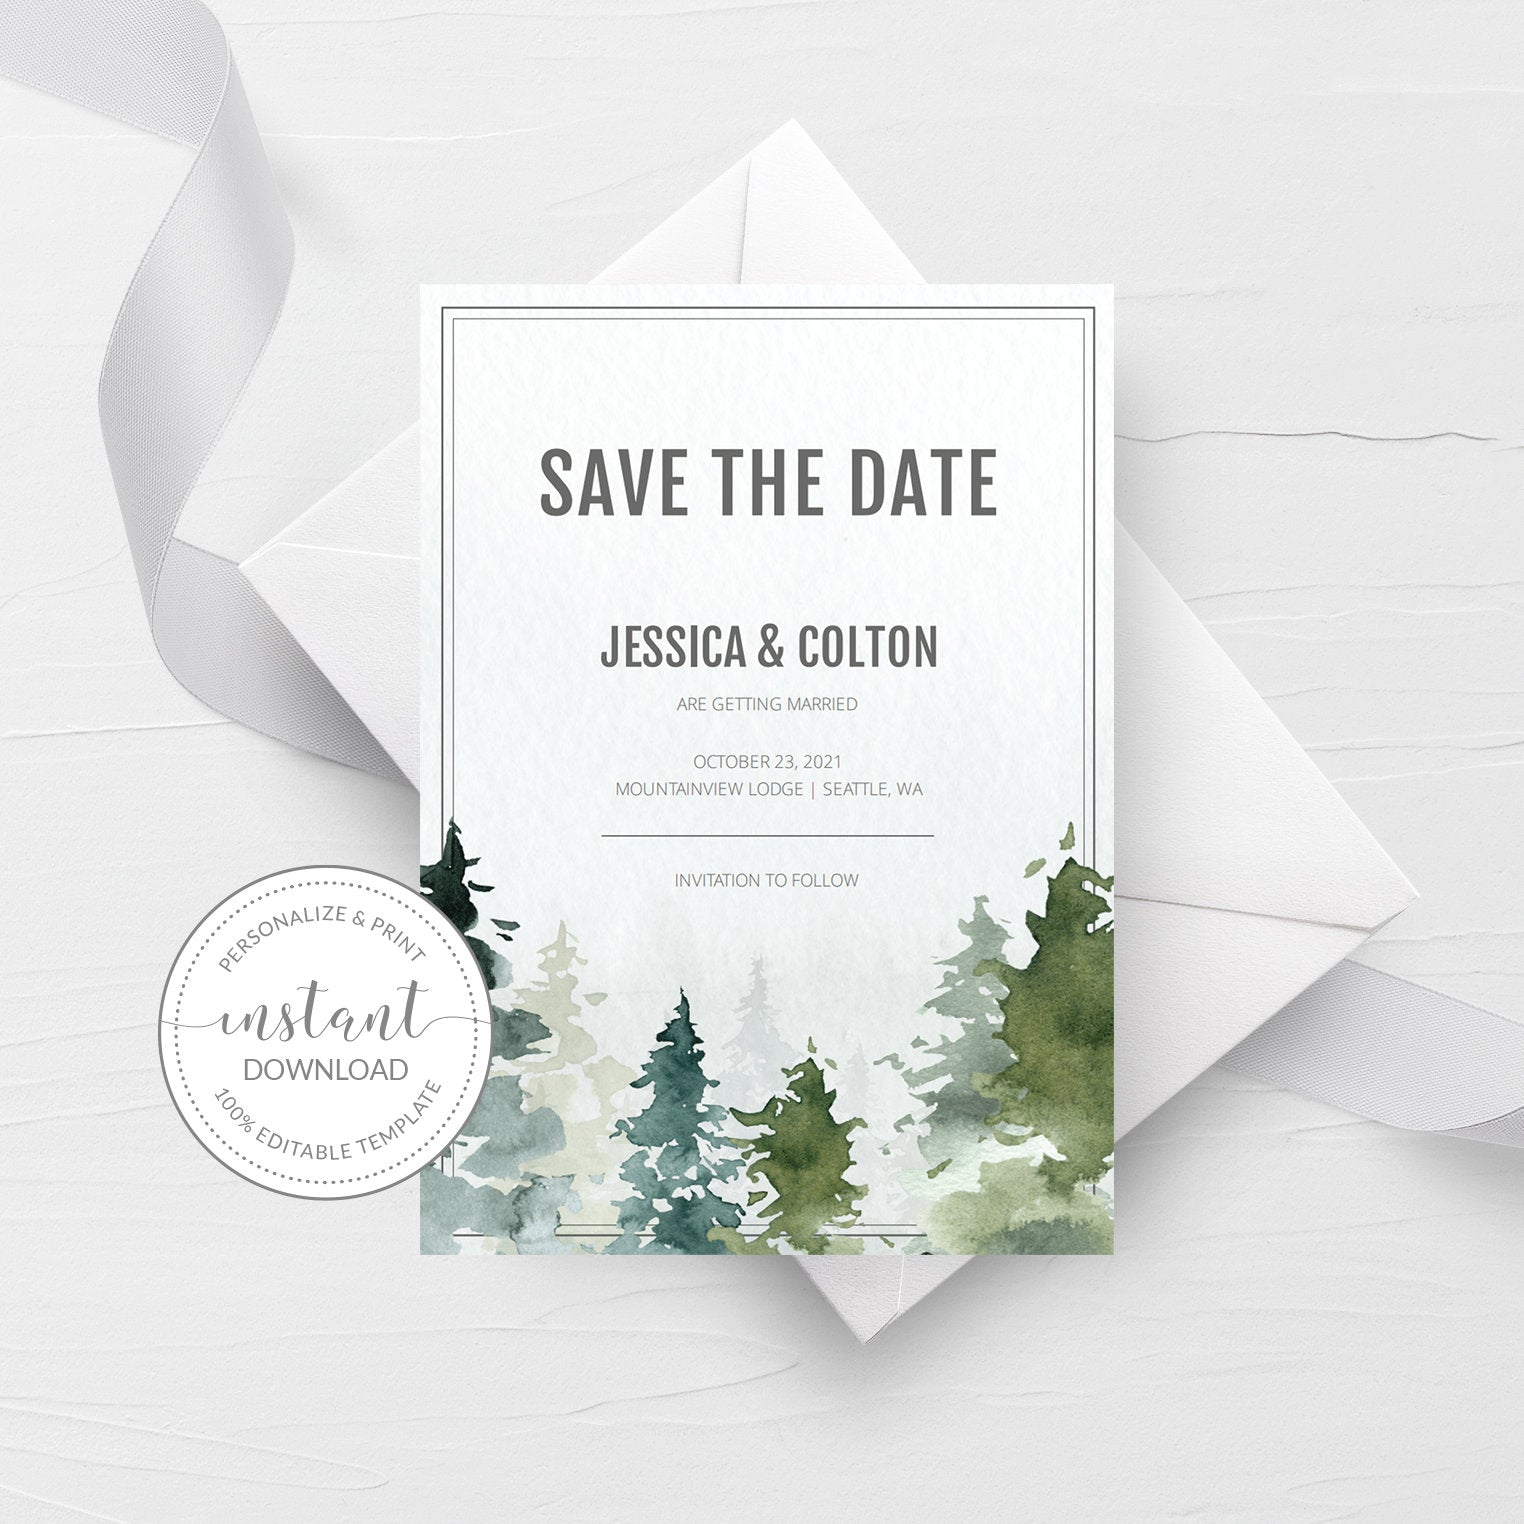 Woodland Forest Save The Date Card Template, Printable Pine Tree Wedding Save The Date, Editable INSTANT DOWNLOAD - D100